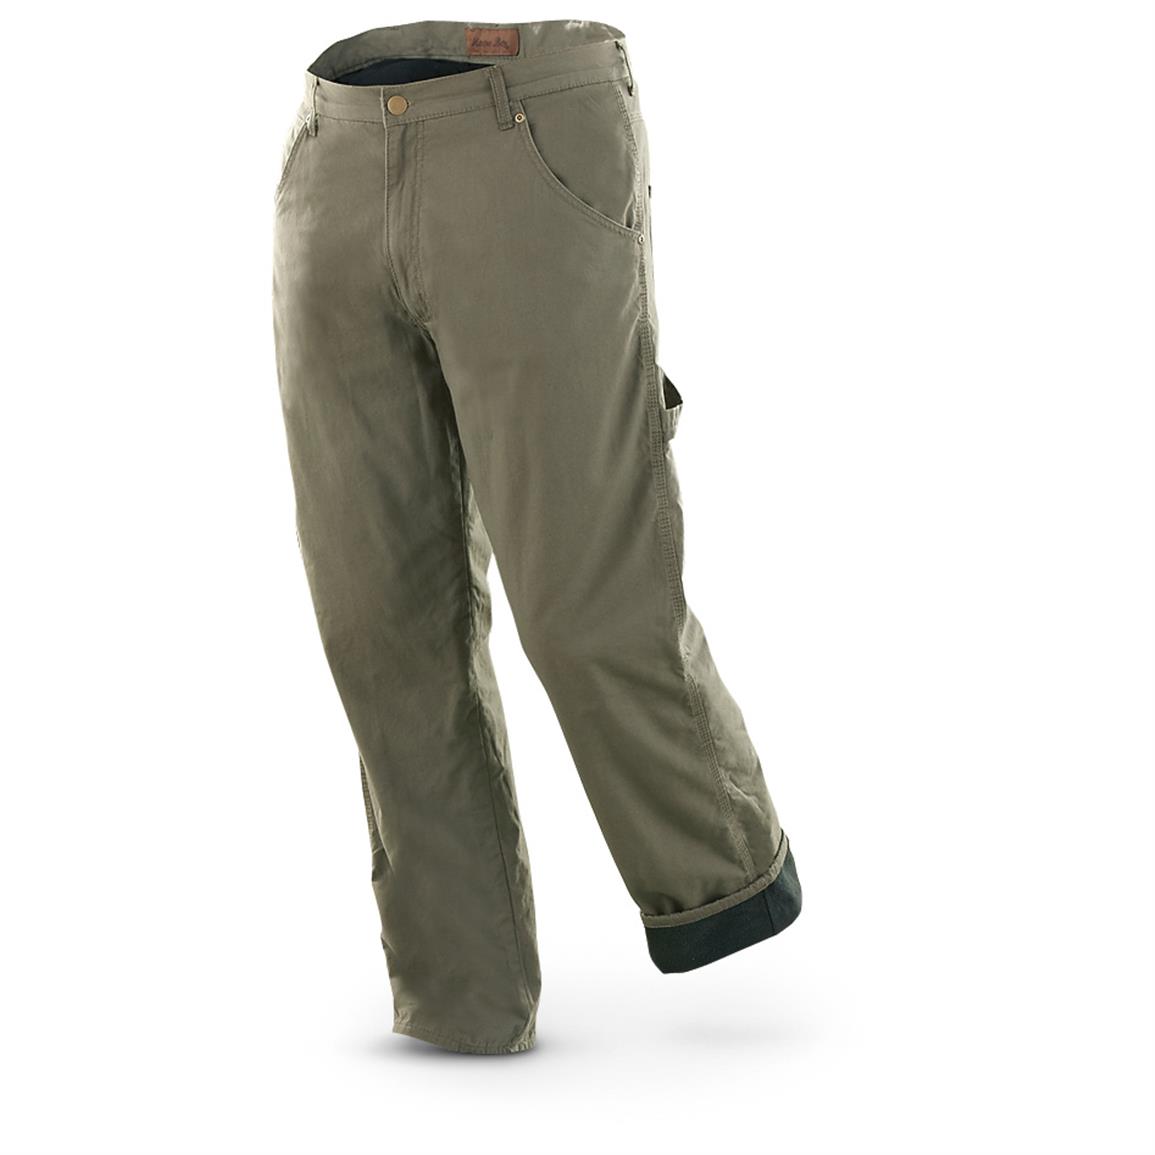 Marino Bay Lined Canvas Carpenter Jeans - 593592, Insulated Pants ...